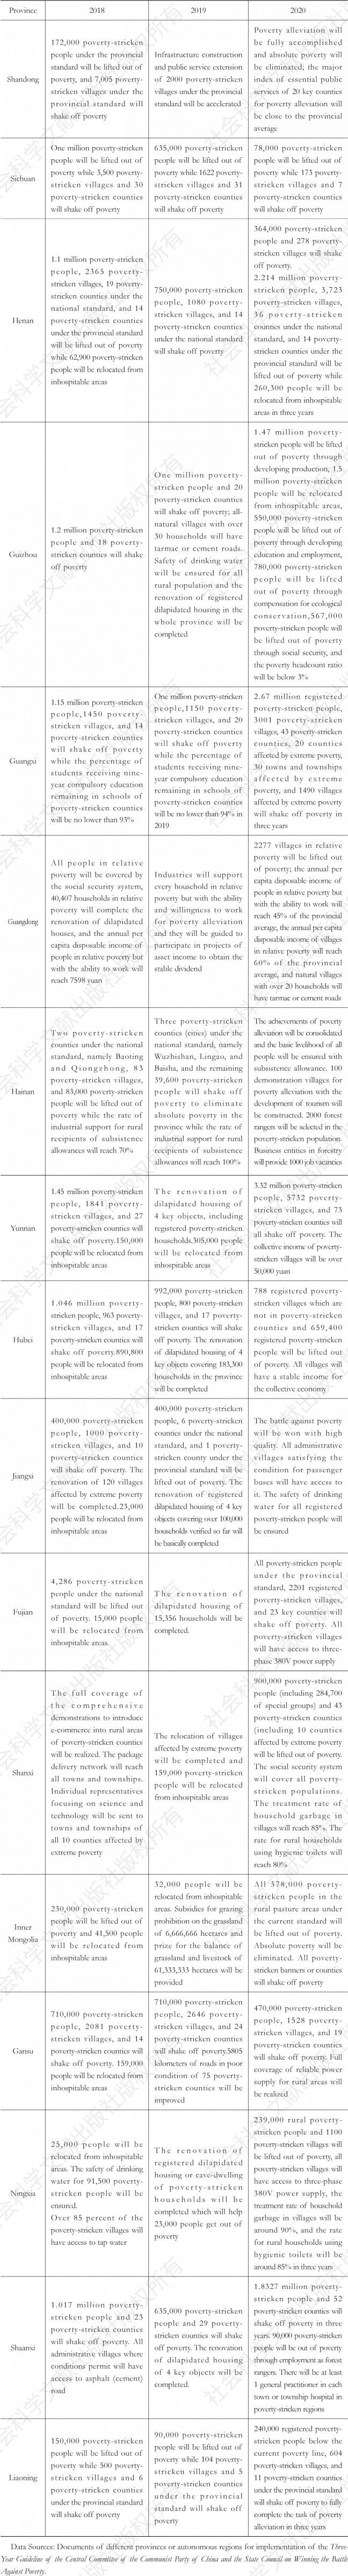 Table 1 Implementation of the Three-Year Guideline of the Central Committee of the Communist Party of China and the State Council on Winning the Battle Against Poverty by Different Provinces